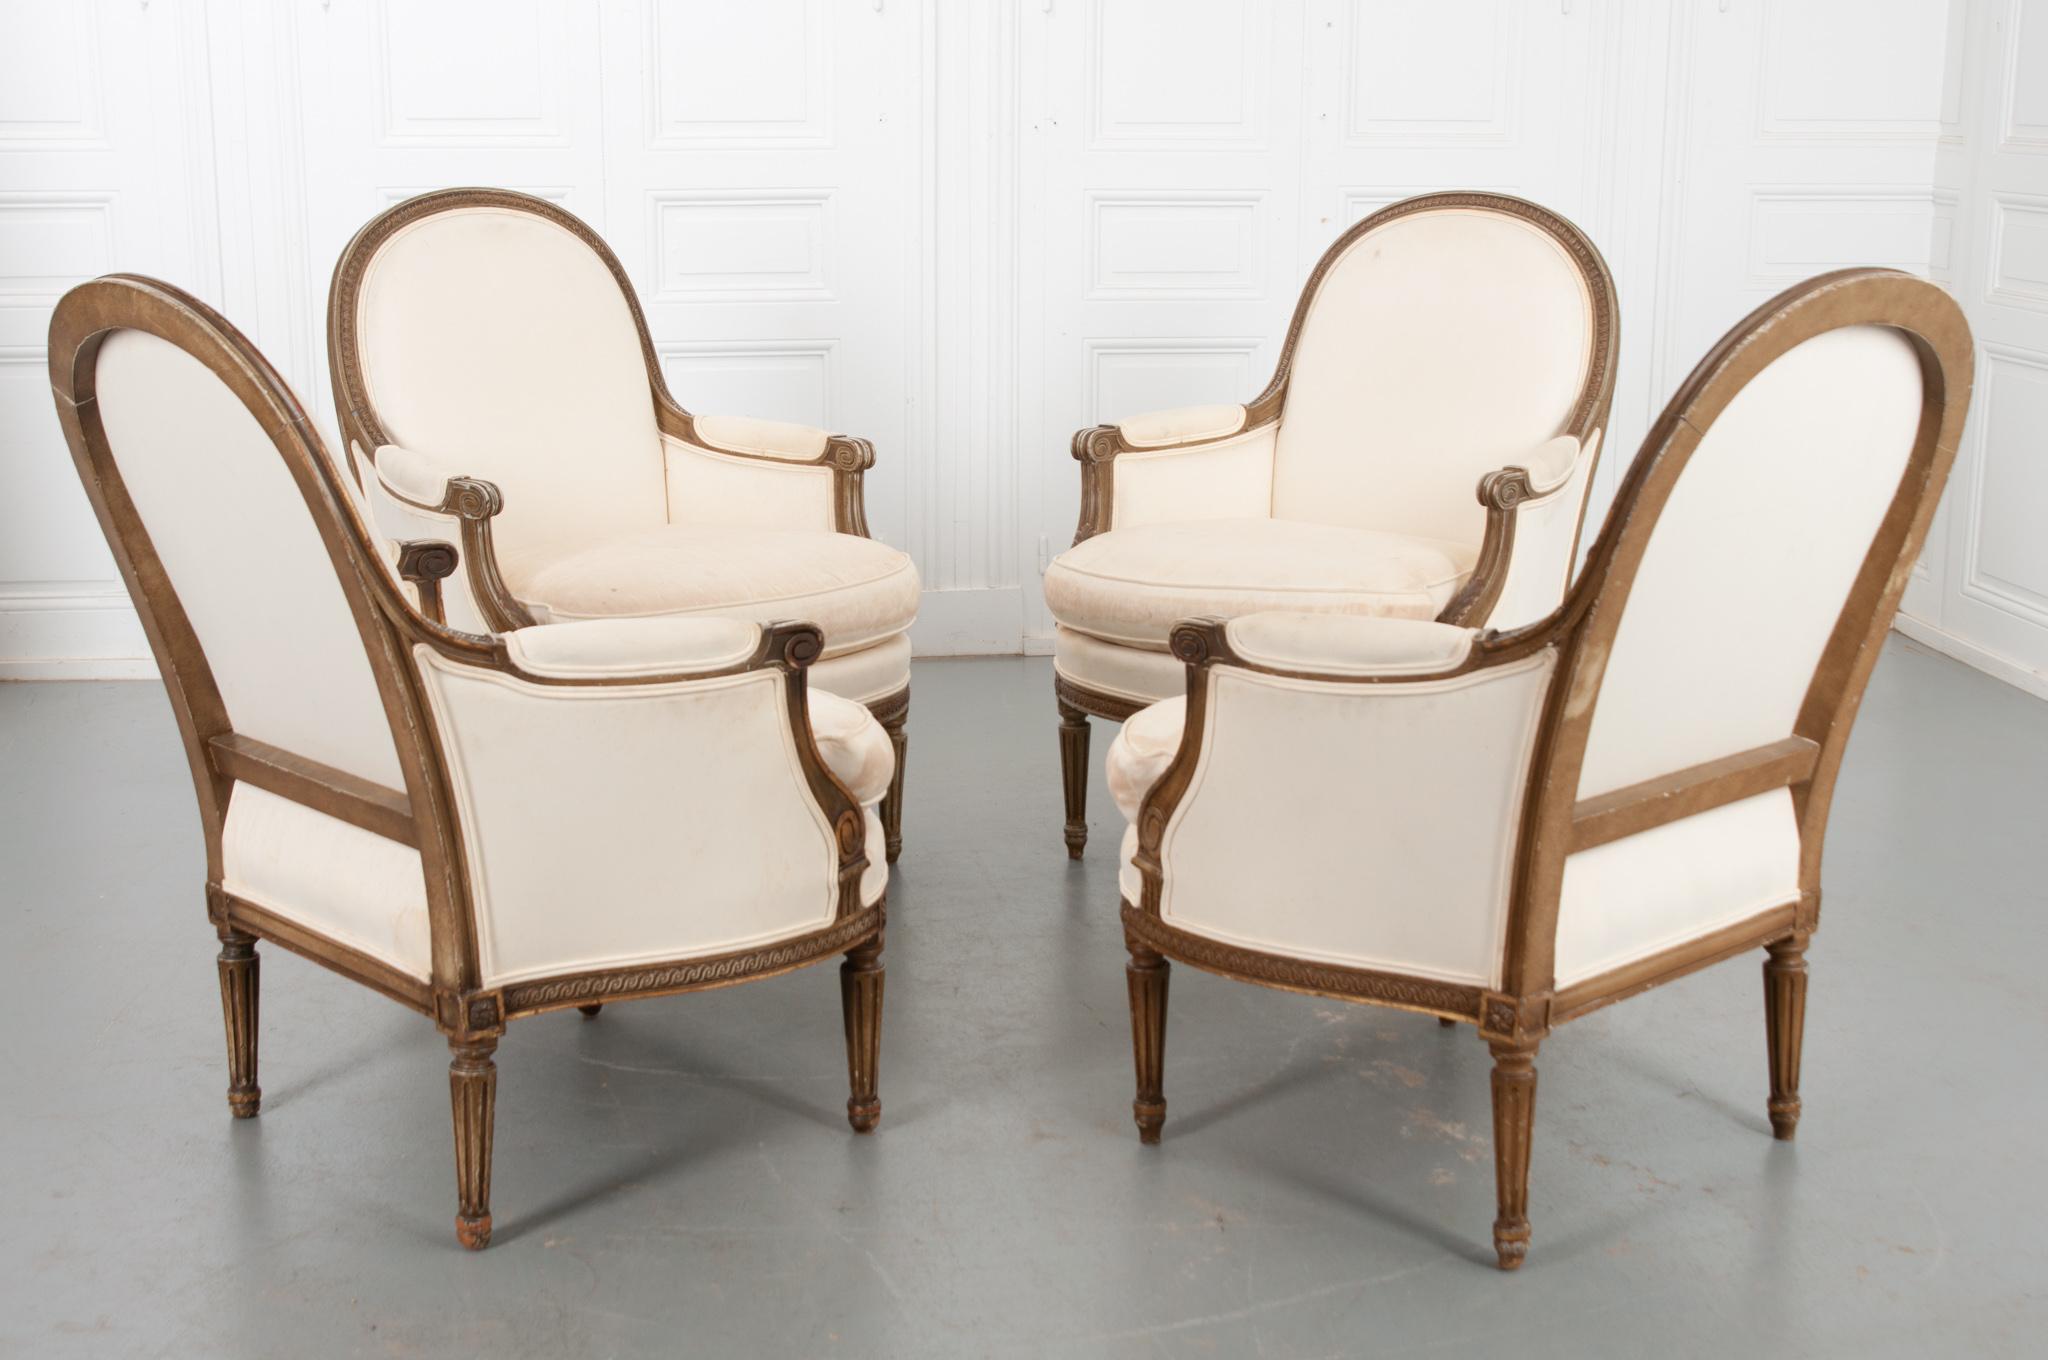 A sophisticated set of four French 19th century bergeres. Fluted legs, indicative of the Louis XVI style, support the broad chairs with slender elegance. The sturdy wooden frames feature neatly carved swirling patterns, rosettes, and scrolling arms.